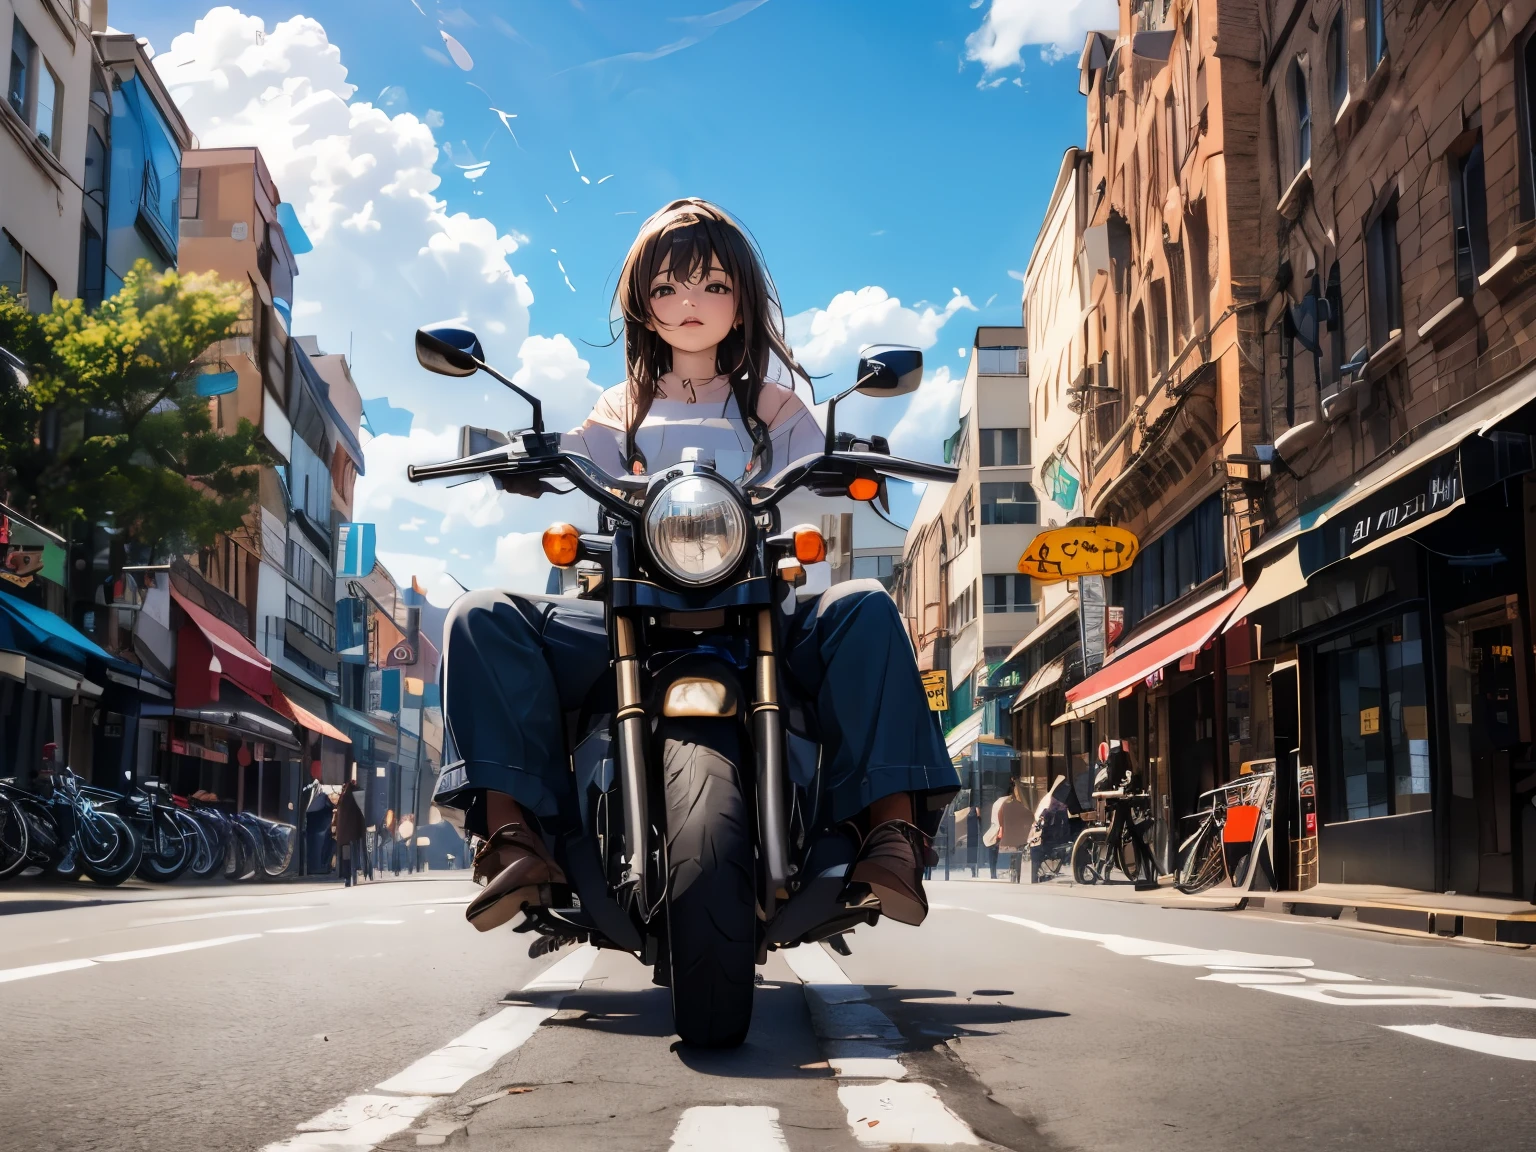 a woman driving a red car with a motorcycle riding alongside on the street, buildings, clouds in the sky,